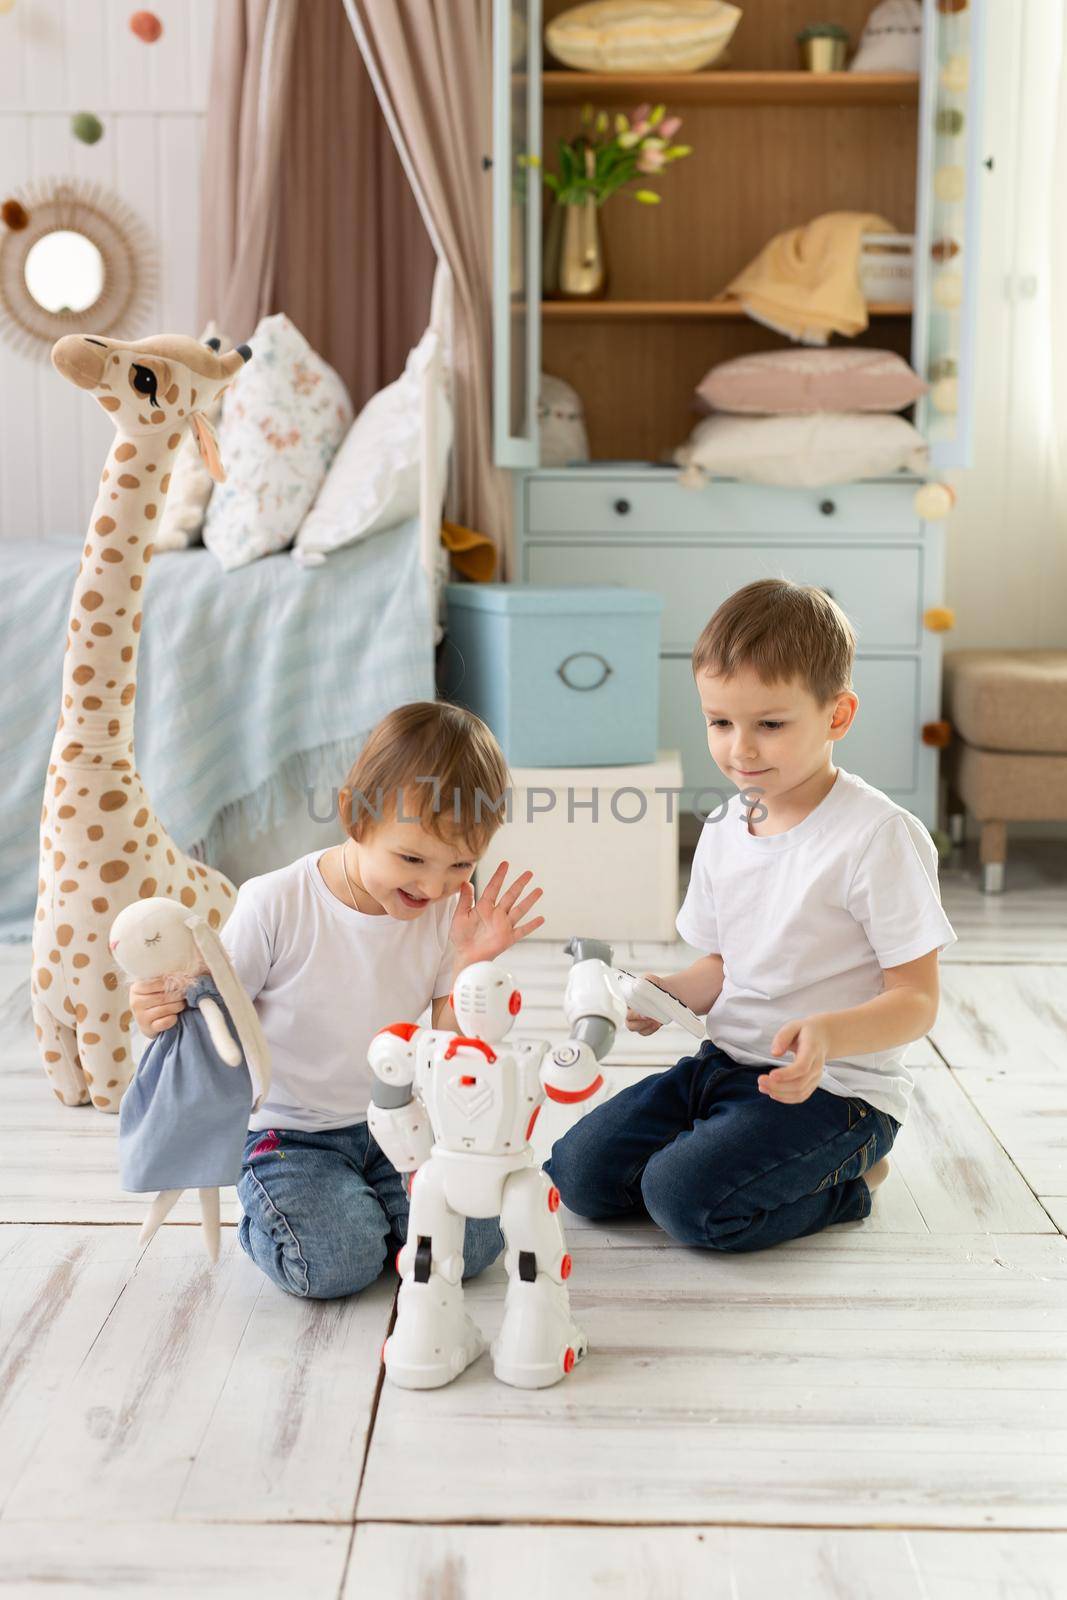 Small children brother and sister sit on the floor in the room, laughing and playing with the robot